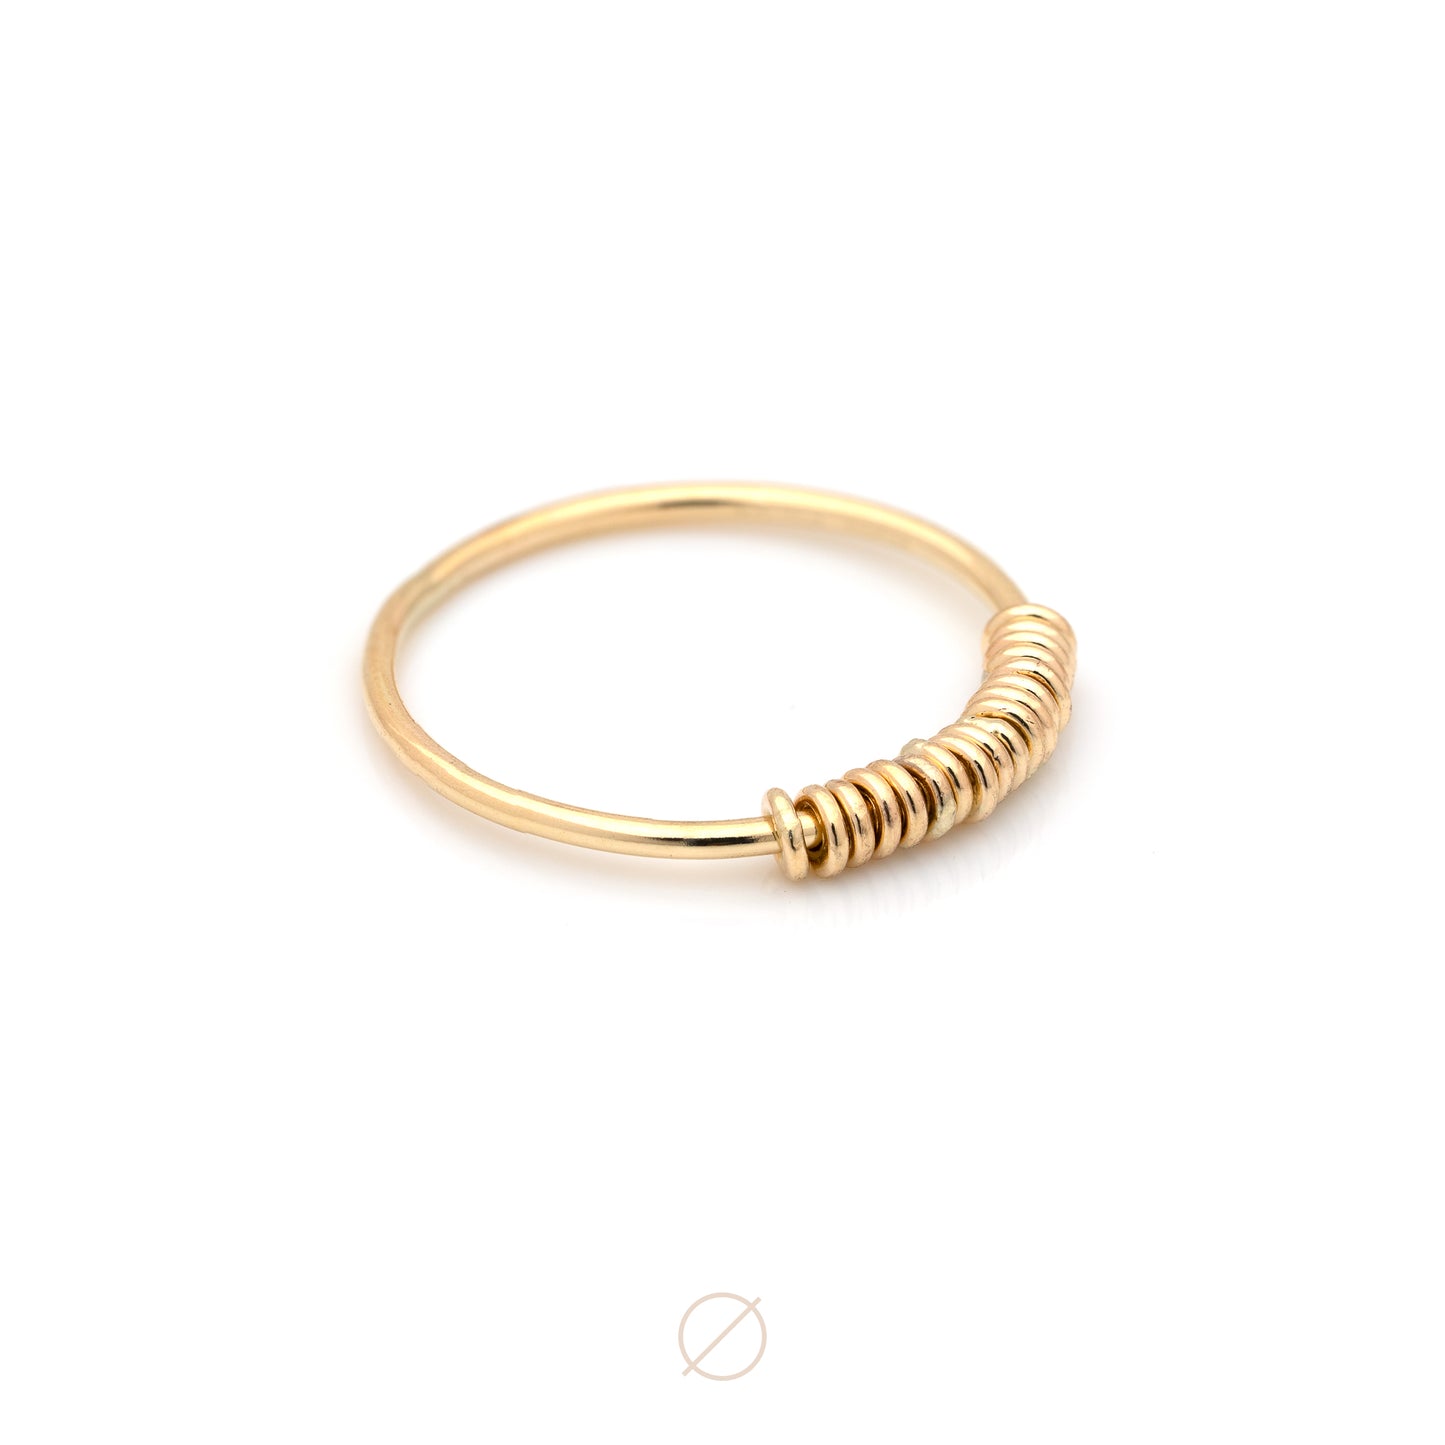 Finger Ring - Abacus in Yellow Gold by Jack + G